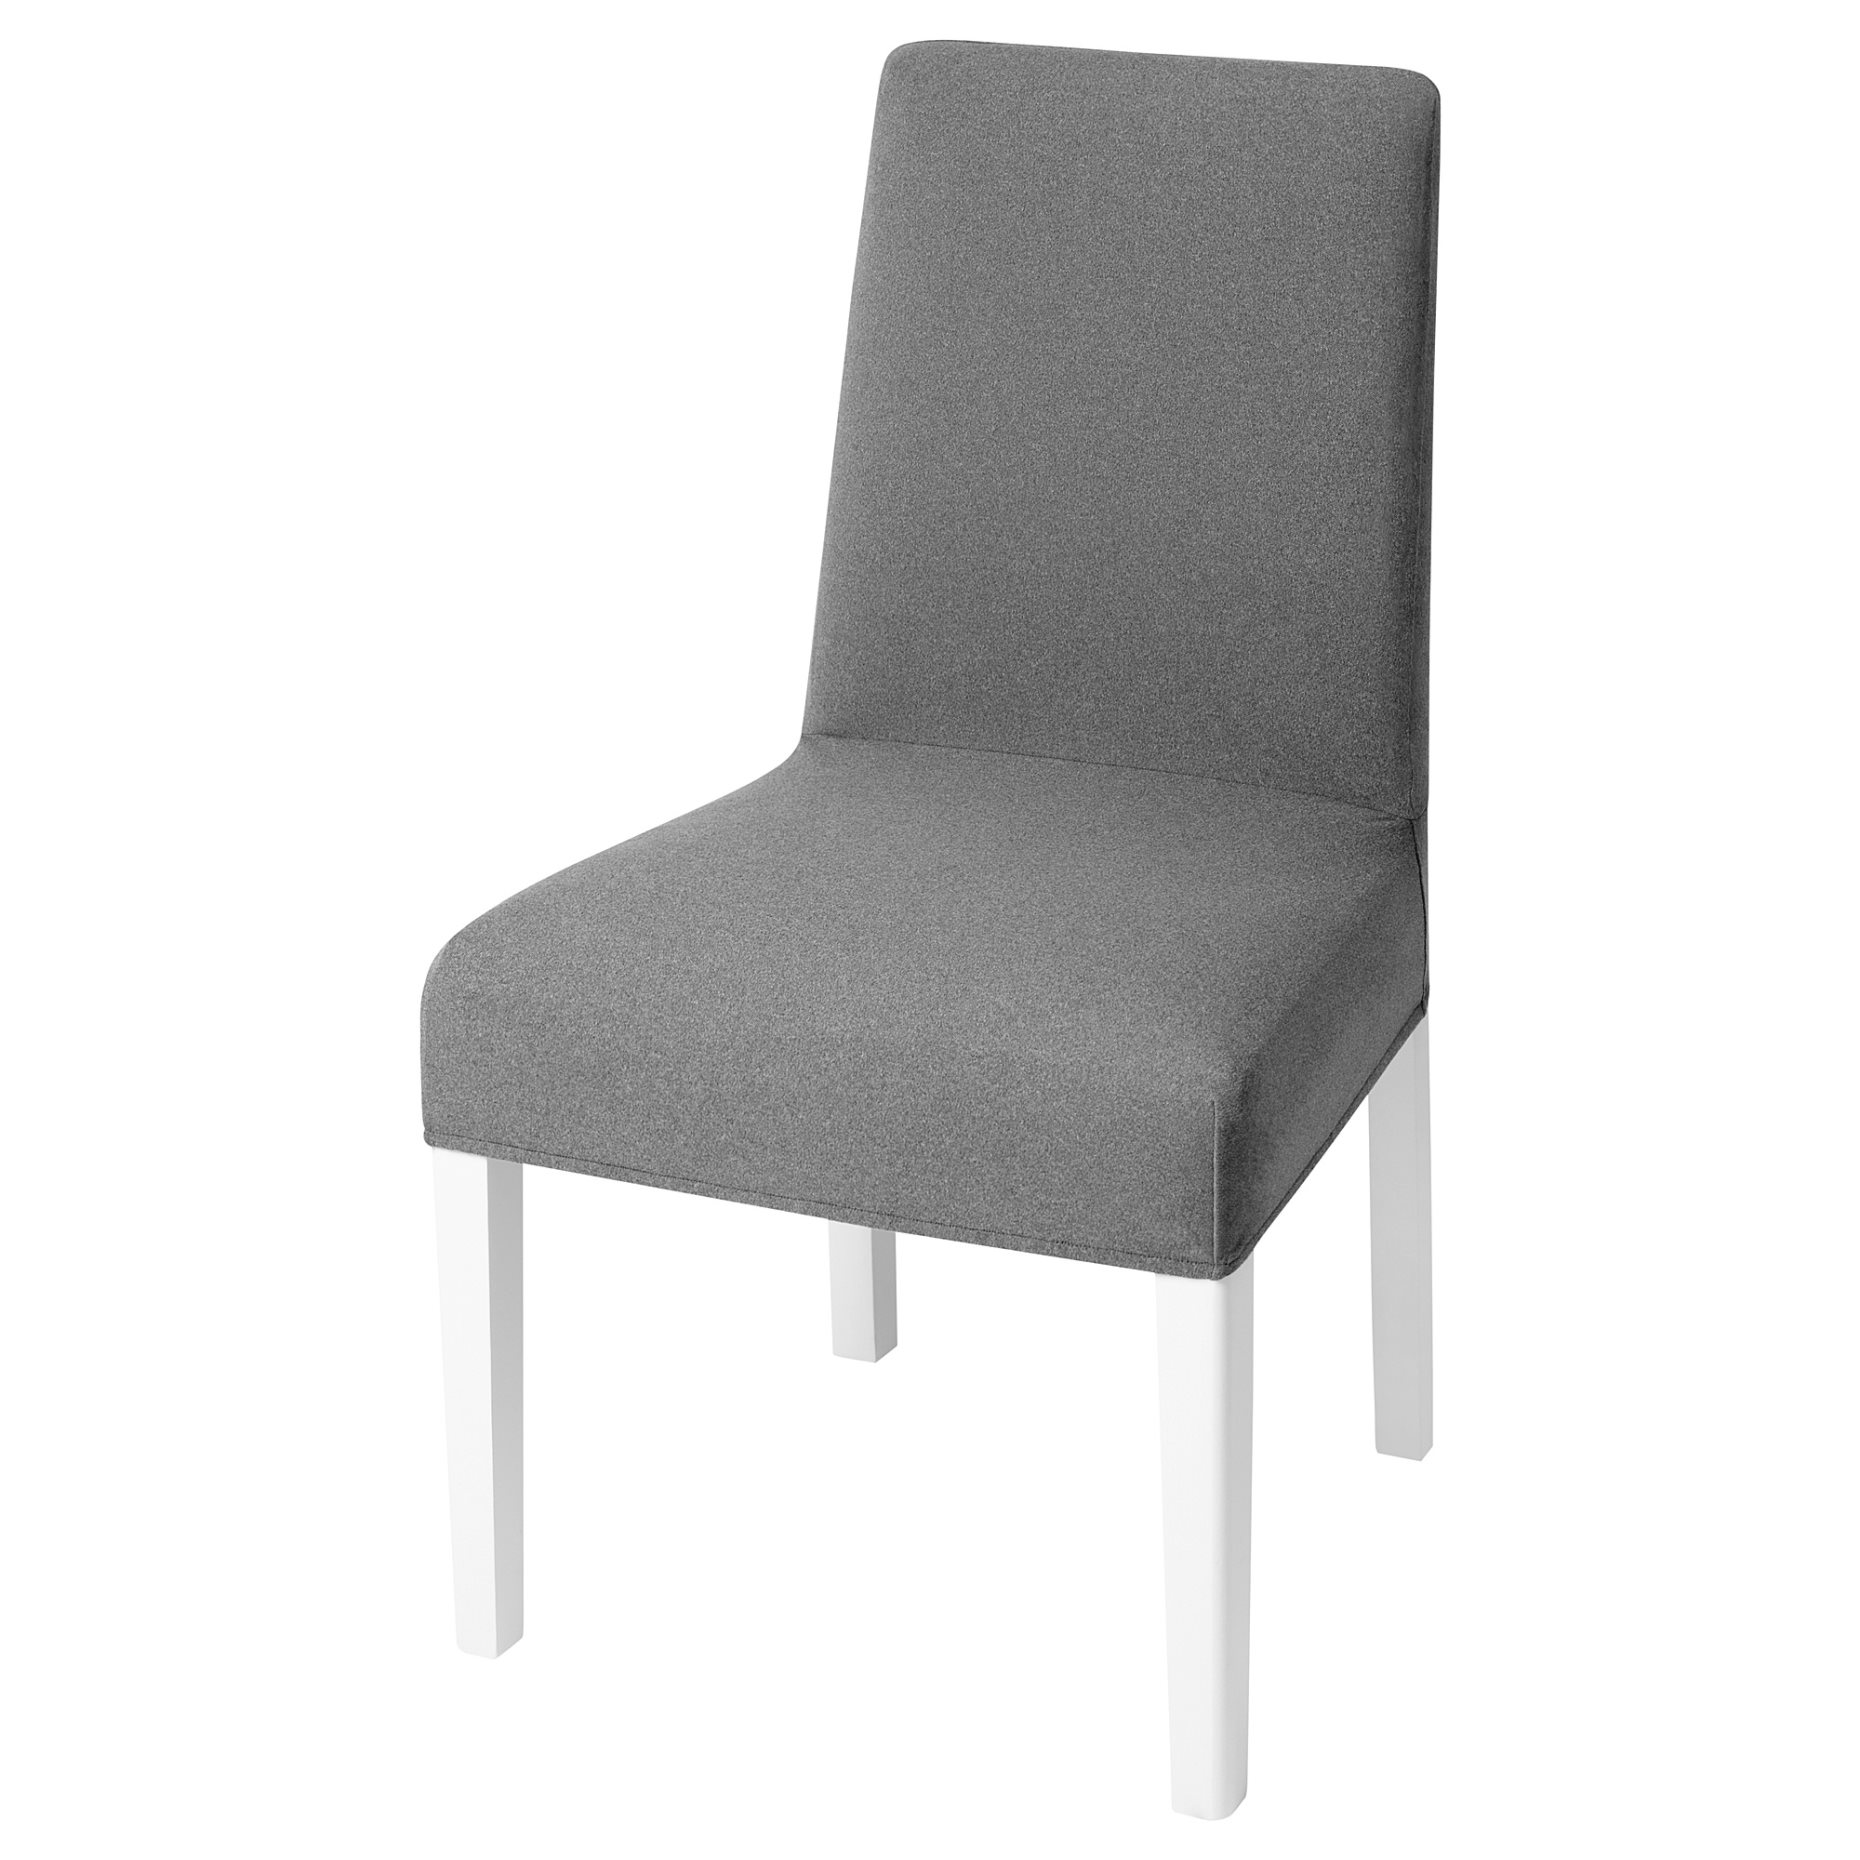 ÄSPHULT, chair cover, 2 pack, 505.598.06